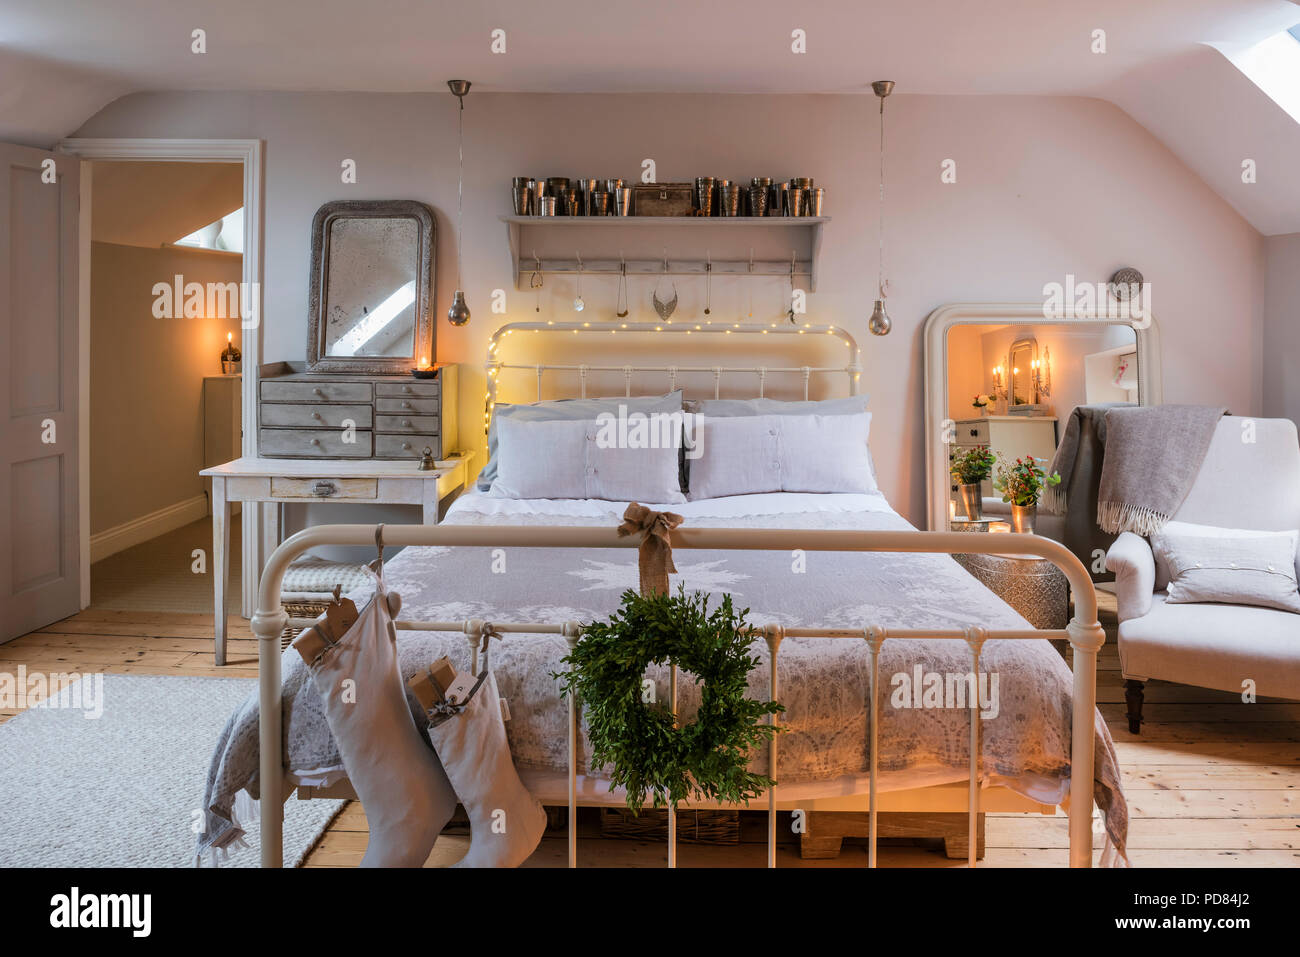 Feather & black's double bed in bedroom with reclaimed wooden flooring and fairy lights Stock Photo